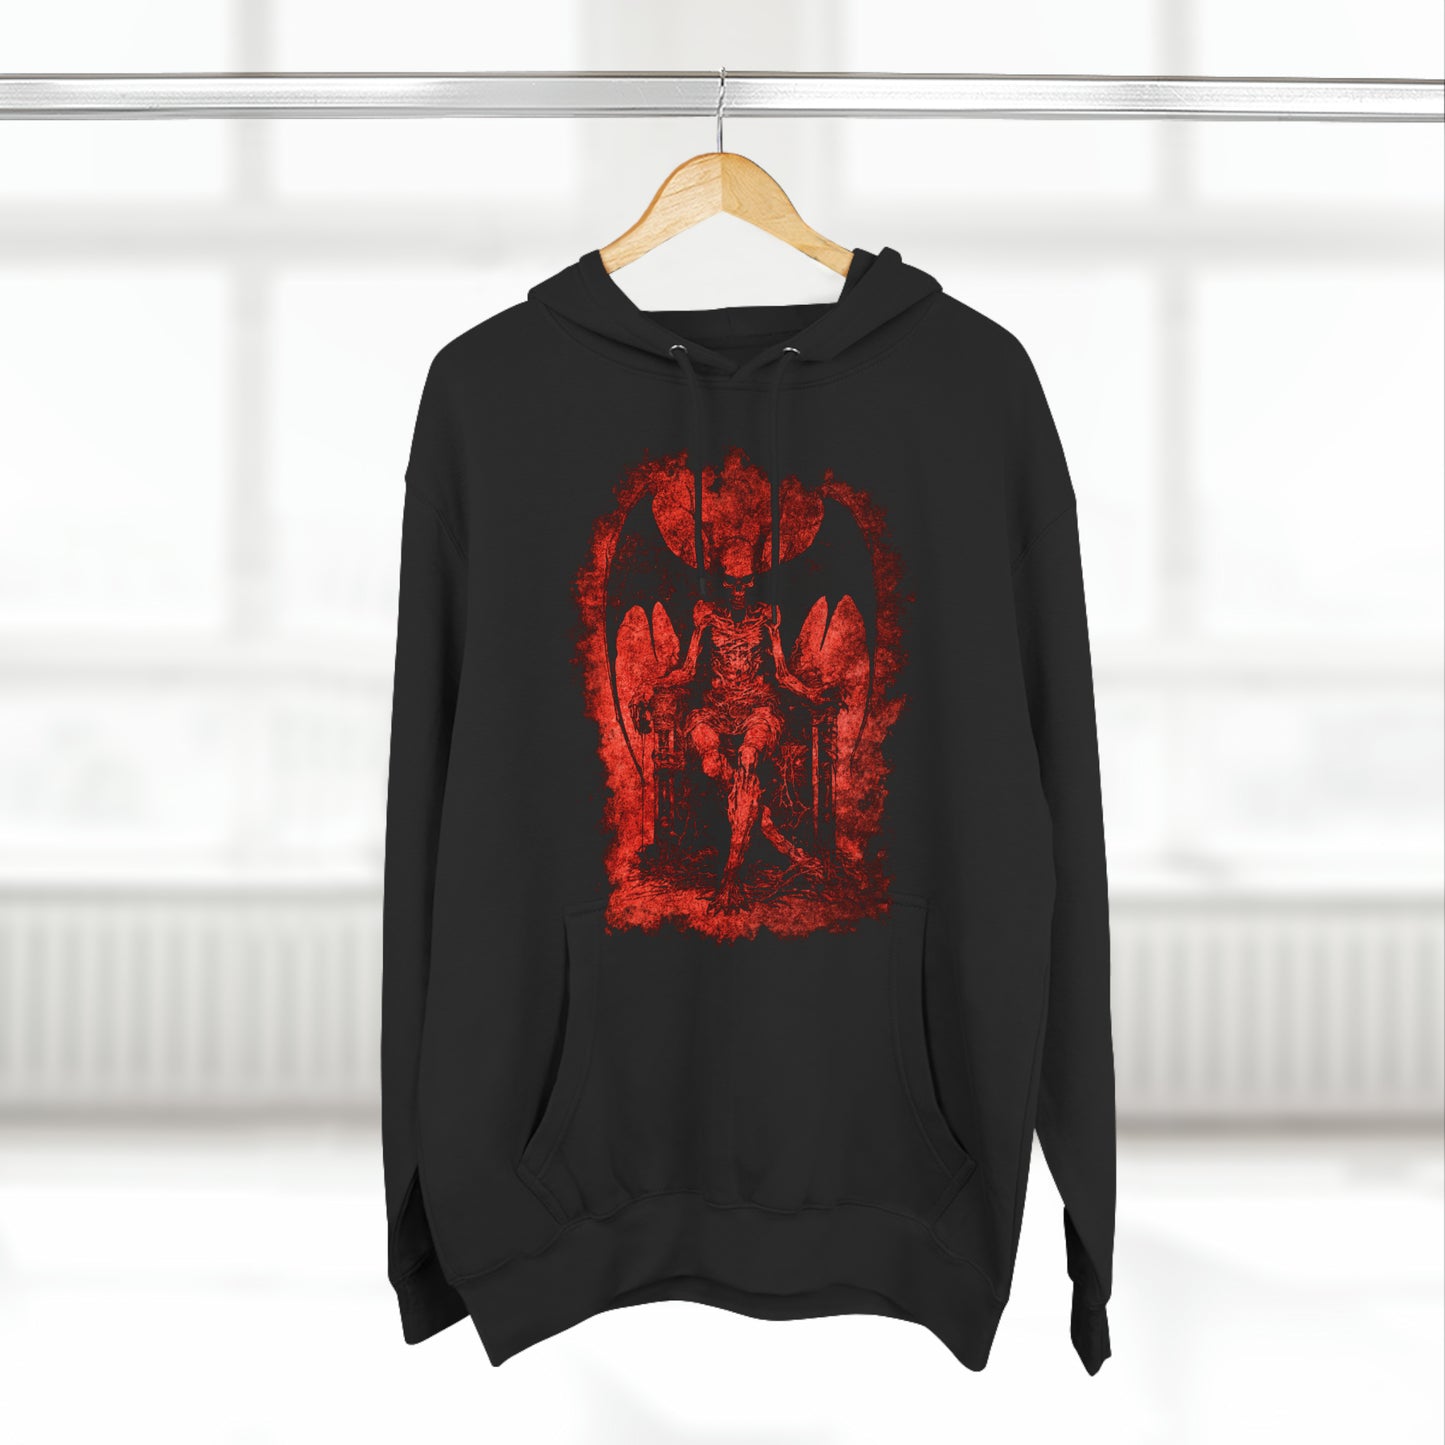 Unisex Pullover Hoodie Devil on his Throne - Red - Frogos Design